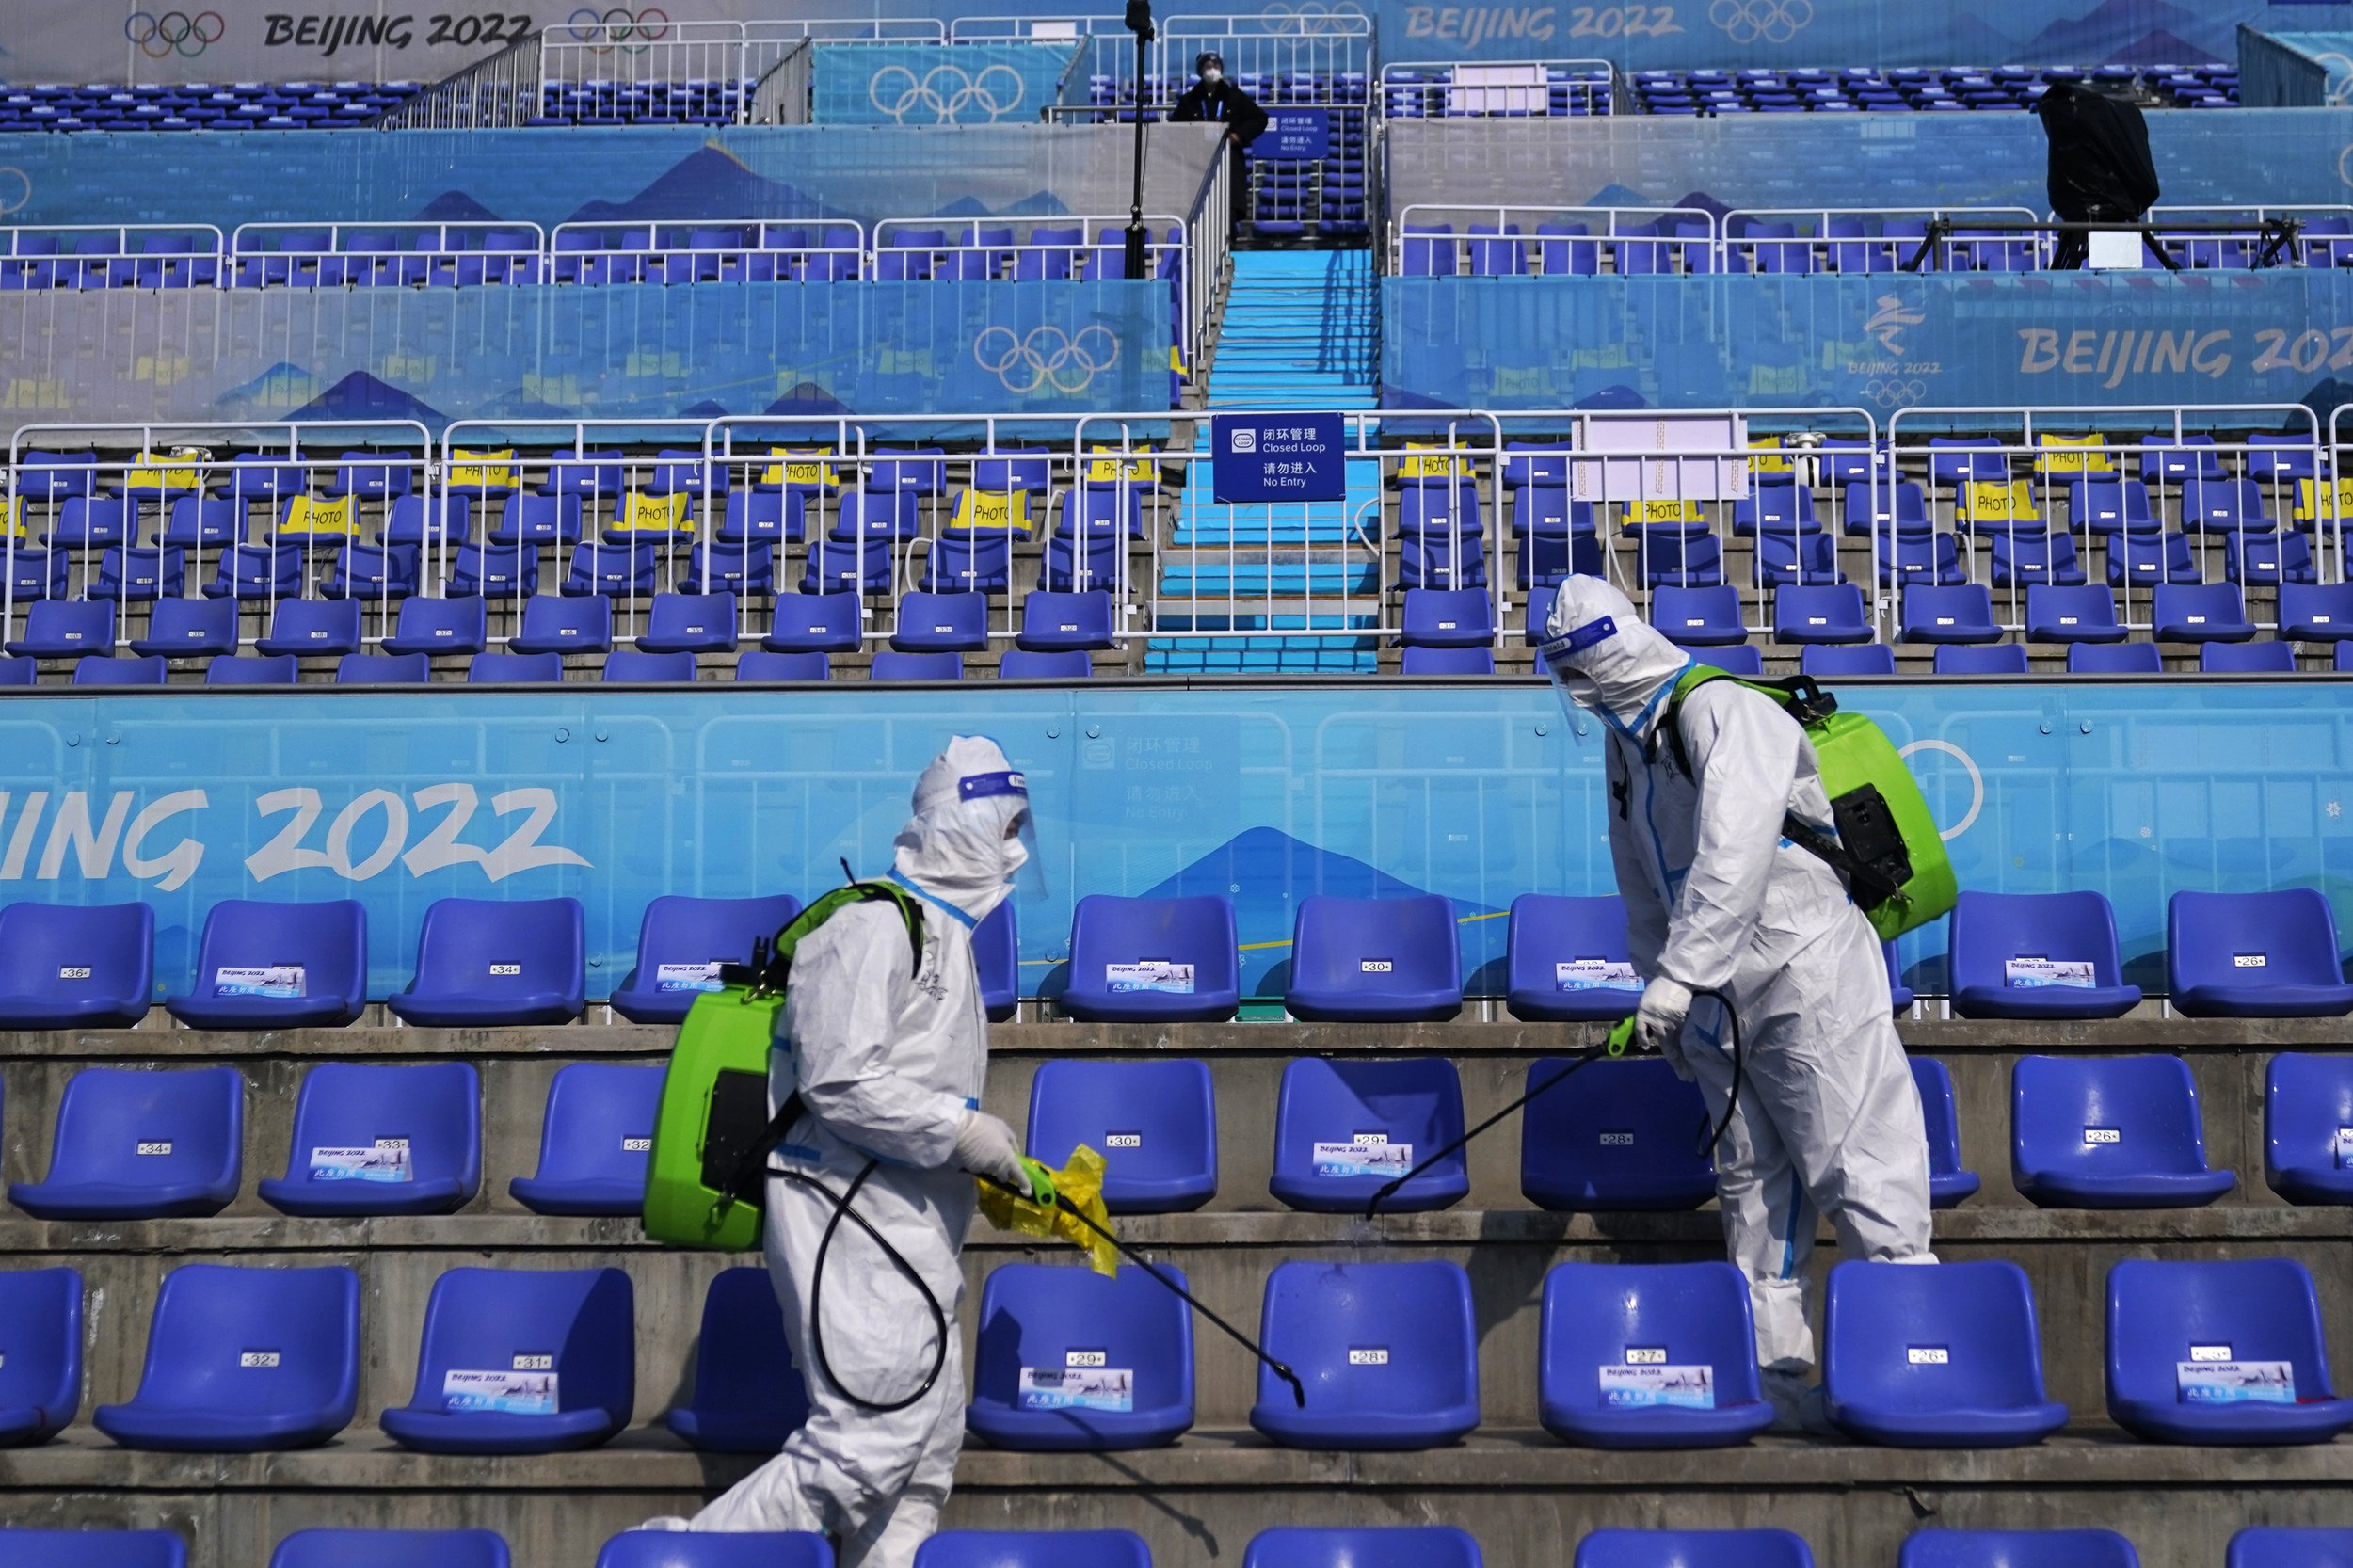  Workers in protective gear disinfect seats following the men's freestyle skiing big air finals of the 2022 Winter Olympics, Wednesday, Feb. 9, 2022, in Beijing. (AP Photo/Jae C. Hong) 